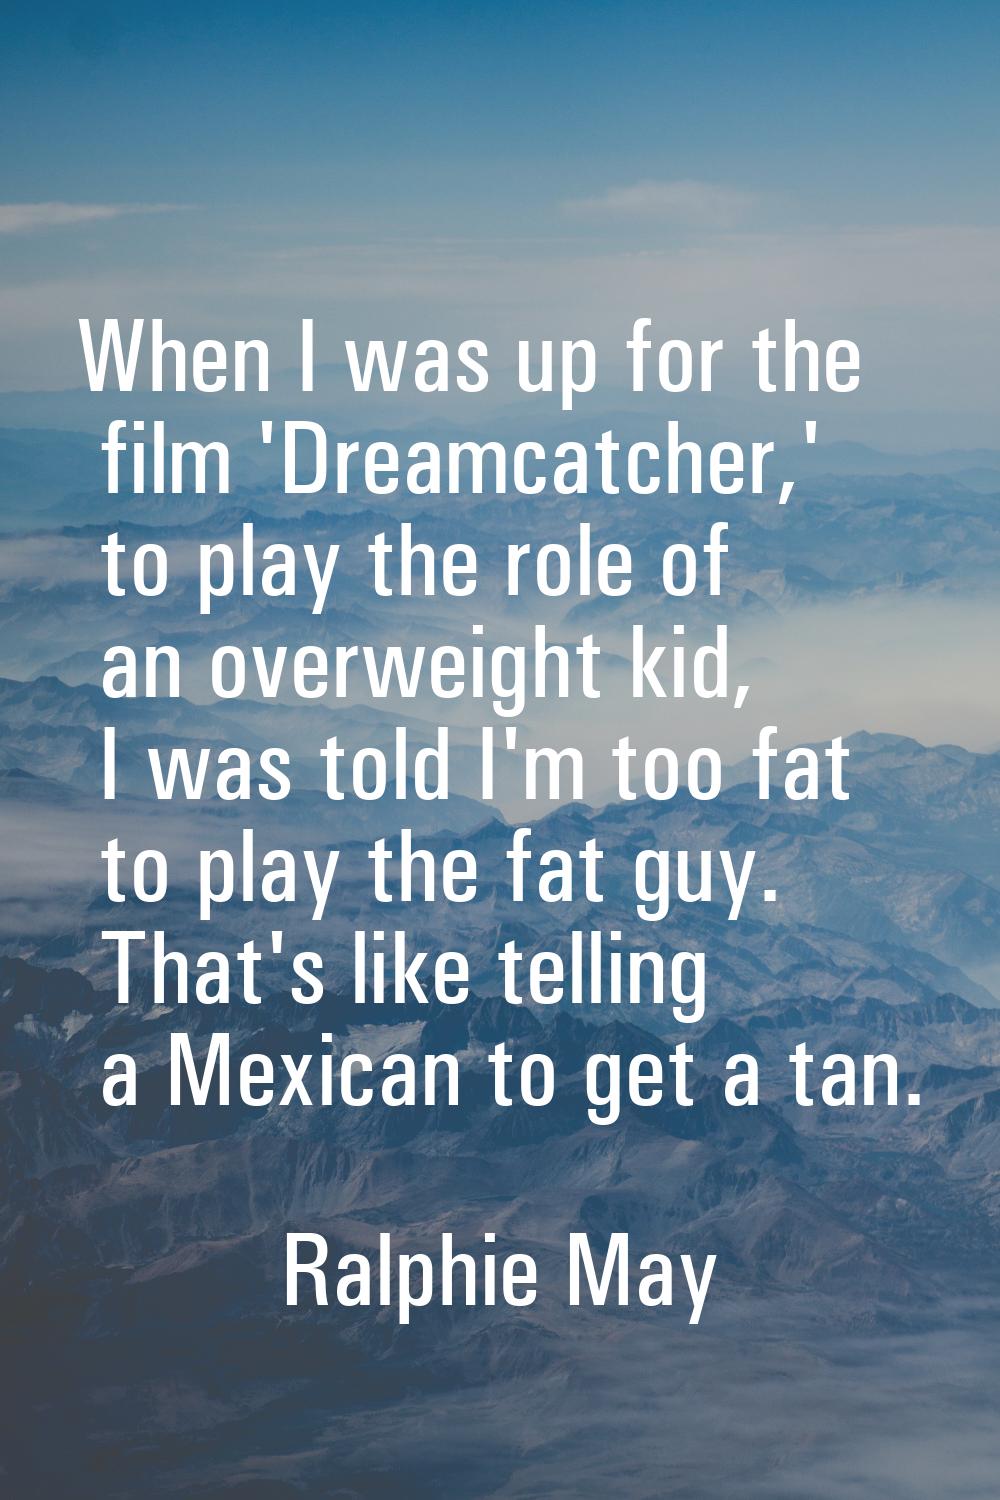 When I was up for the film 'Dreamcatcher,' to play the role of an overweight kid, I was told I'm to